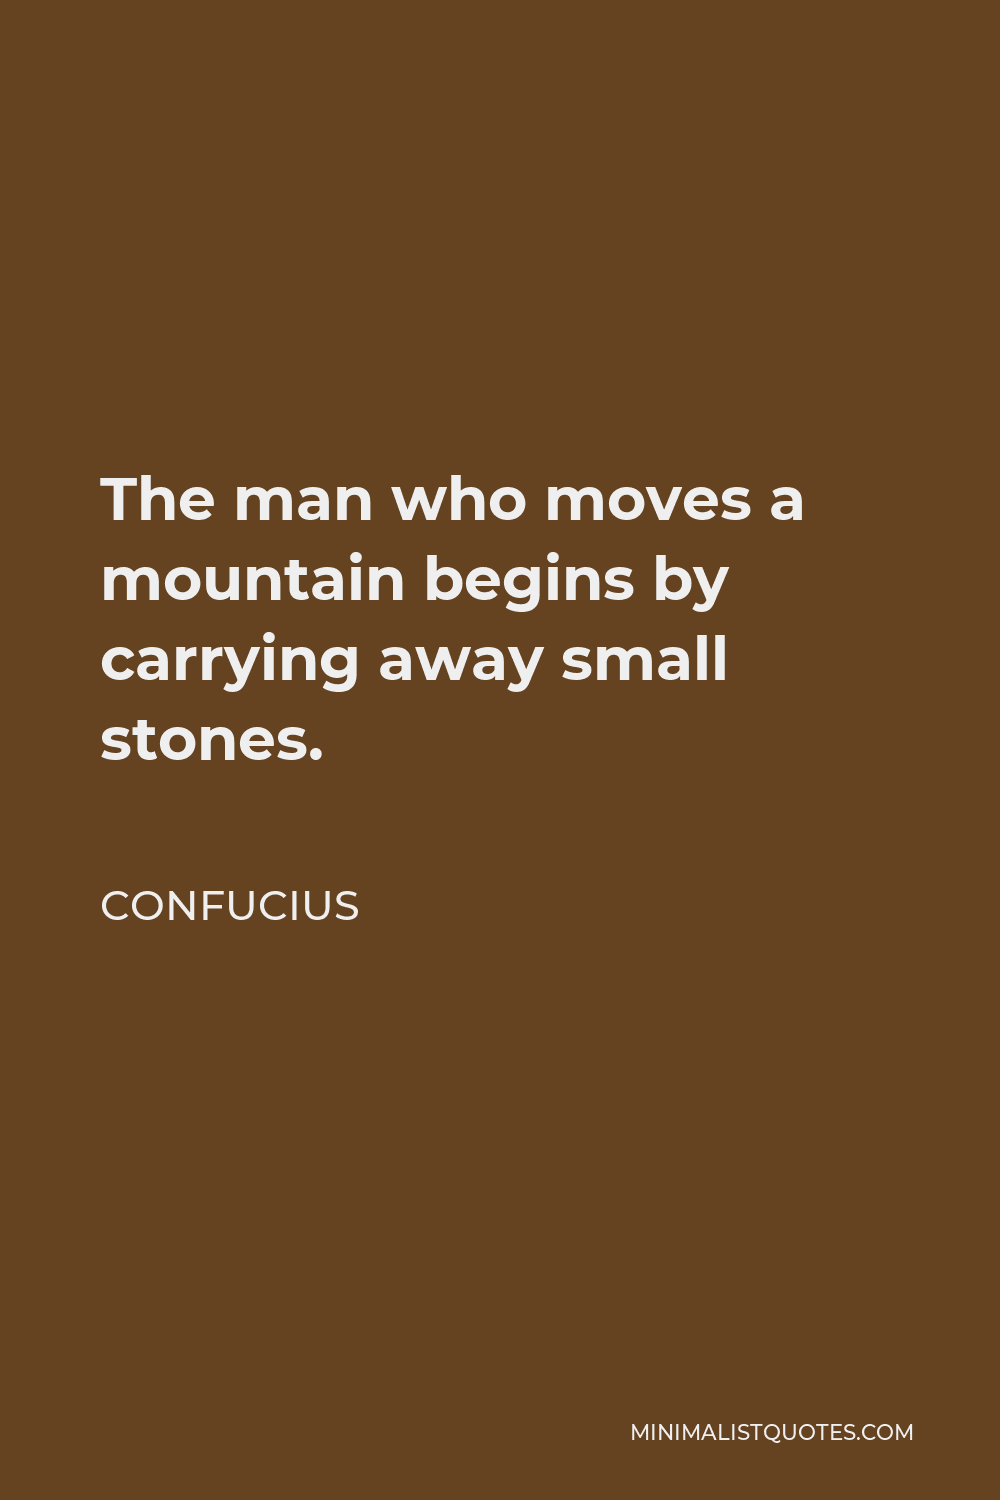 Confucius Quote - The man who moves a mountain begins by carrying away small stones.